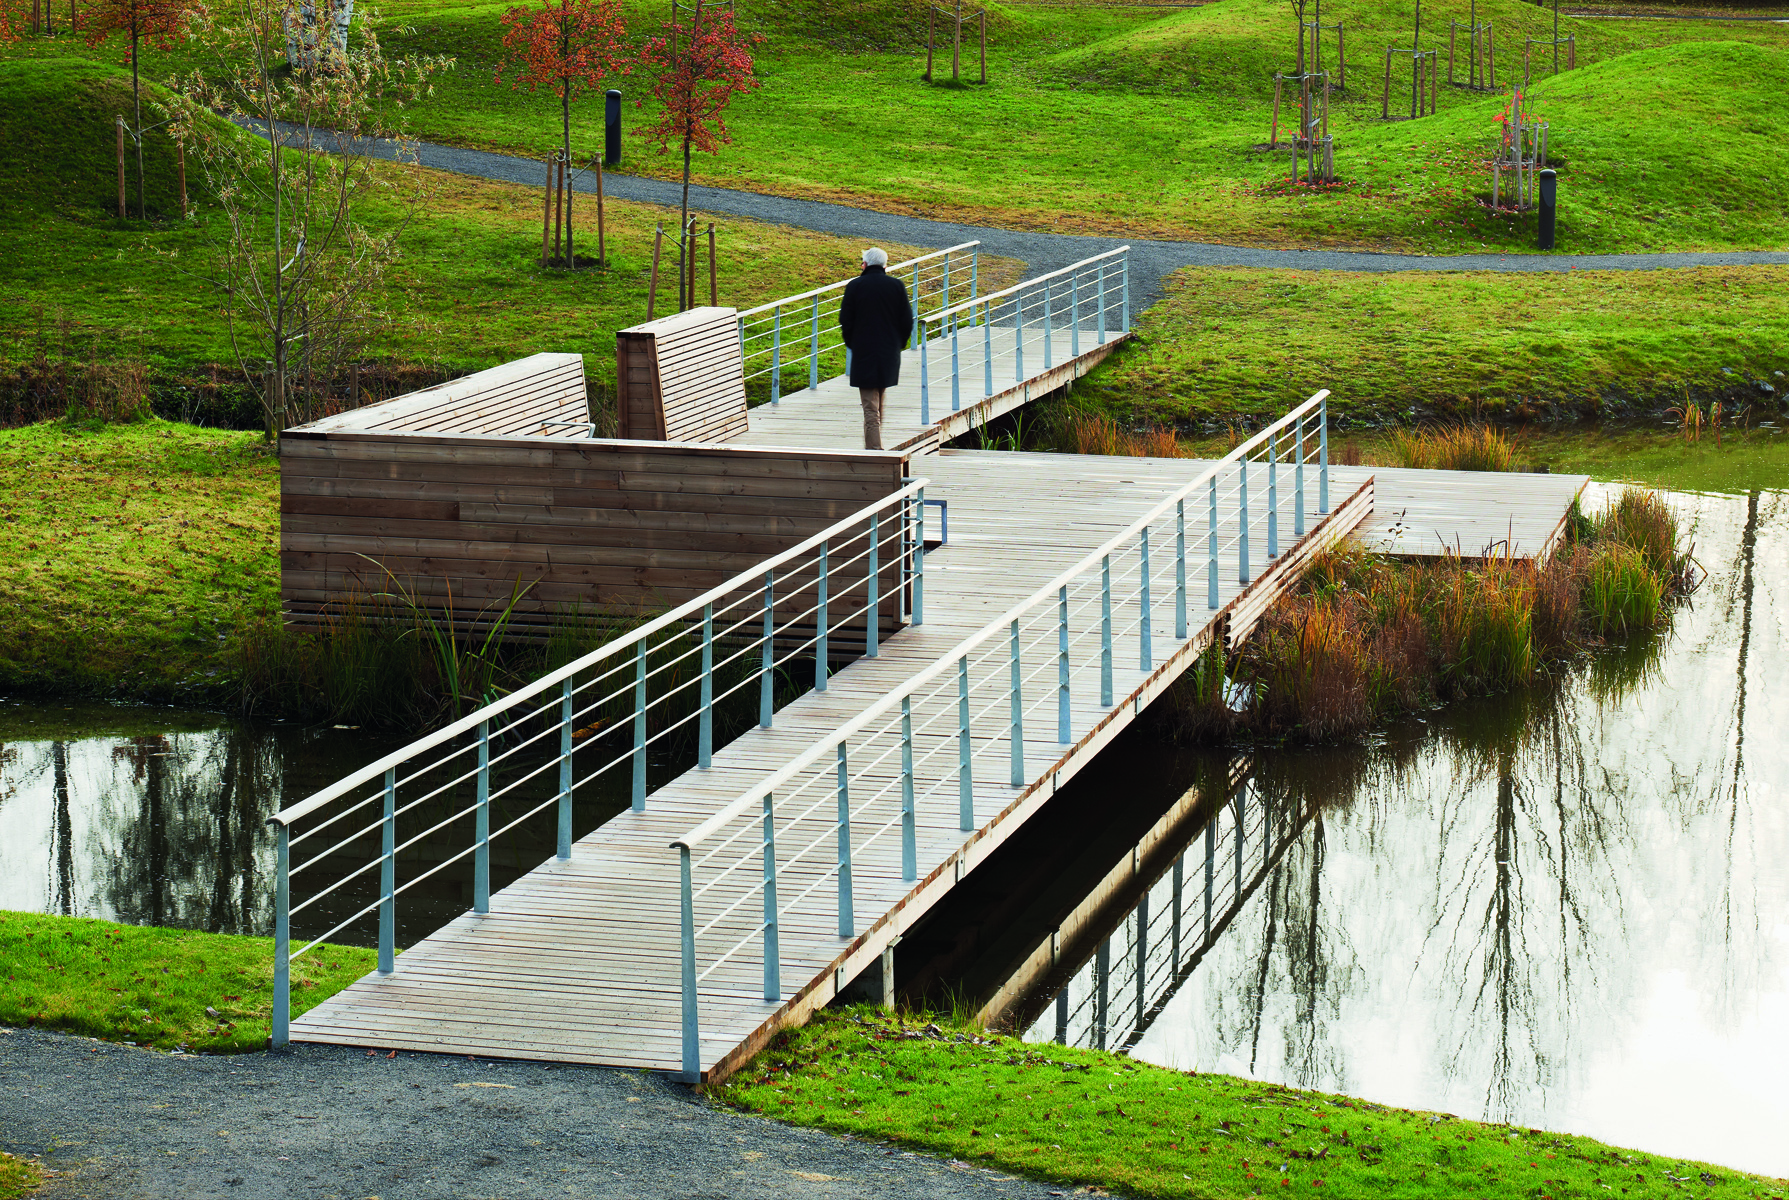 Luminous green cover, Nature Site Restraint Thorbjoern Andersson Landscape Architecture in black font to upper edge.